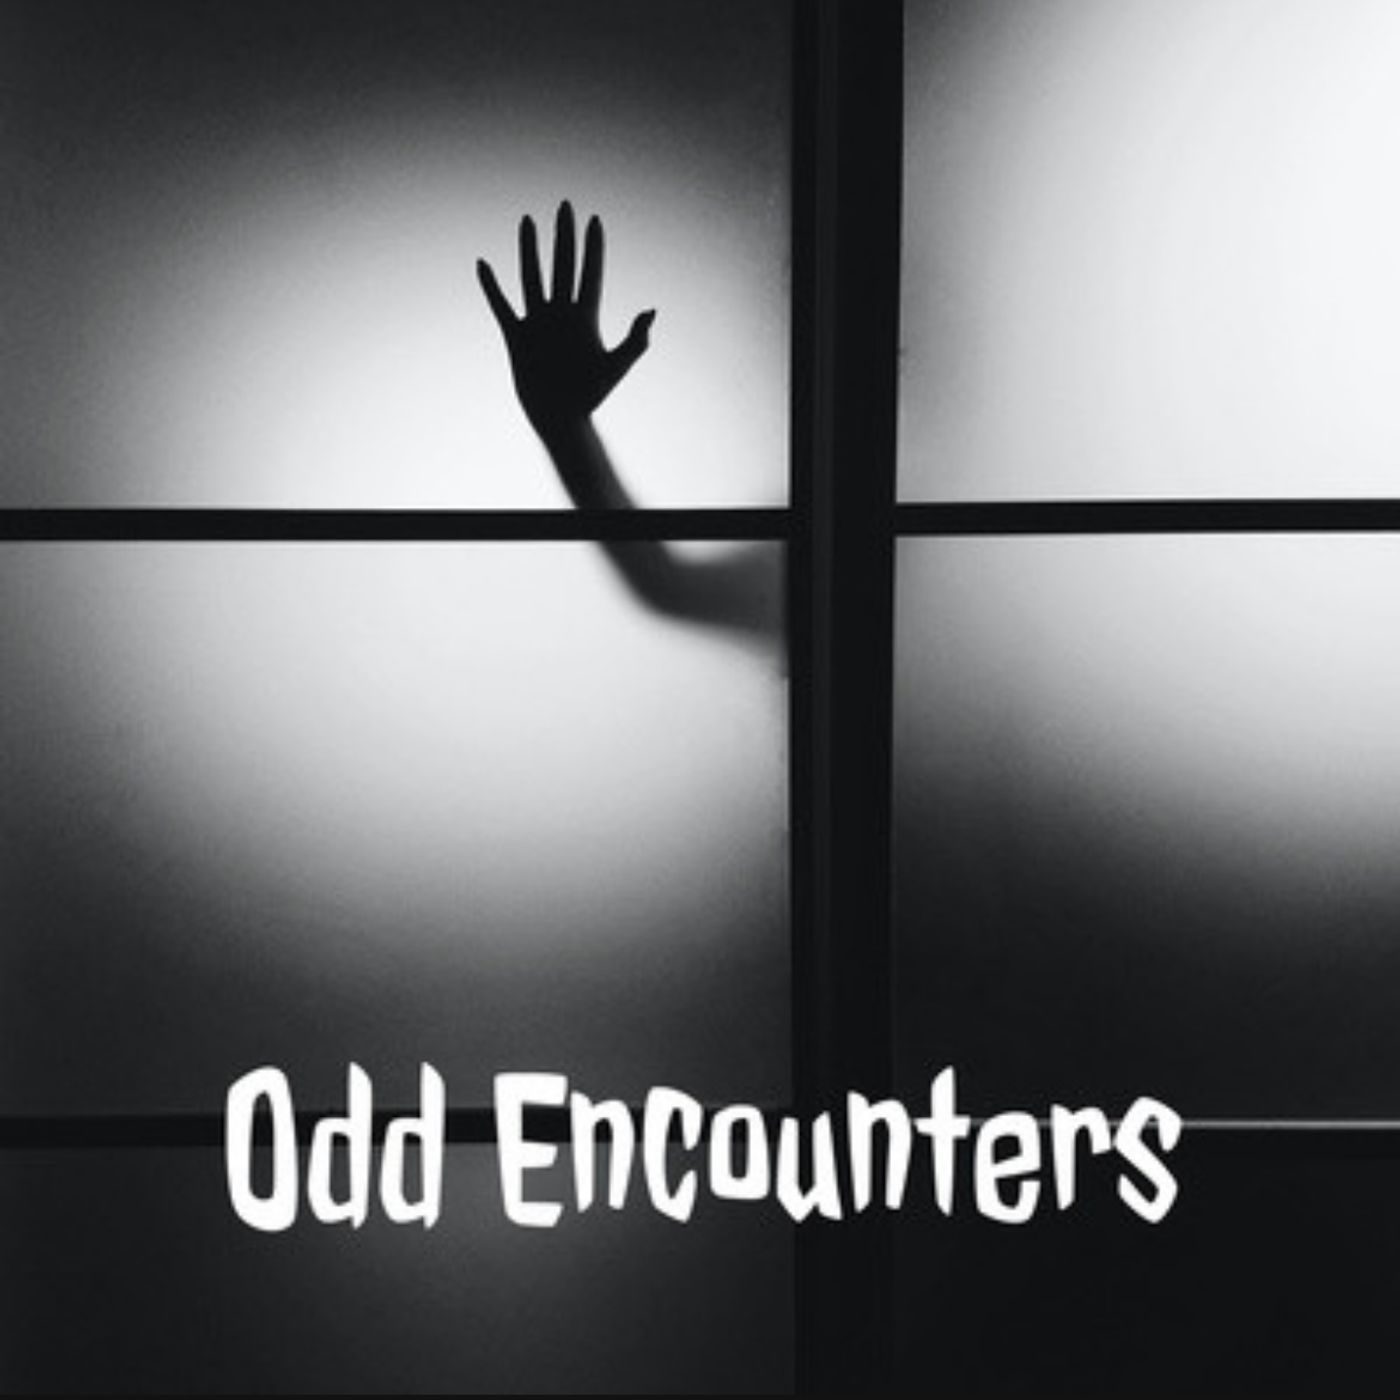 The Possession of Roland Doe by Odd Encounters